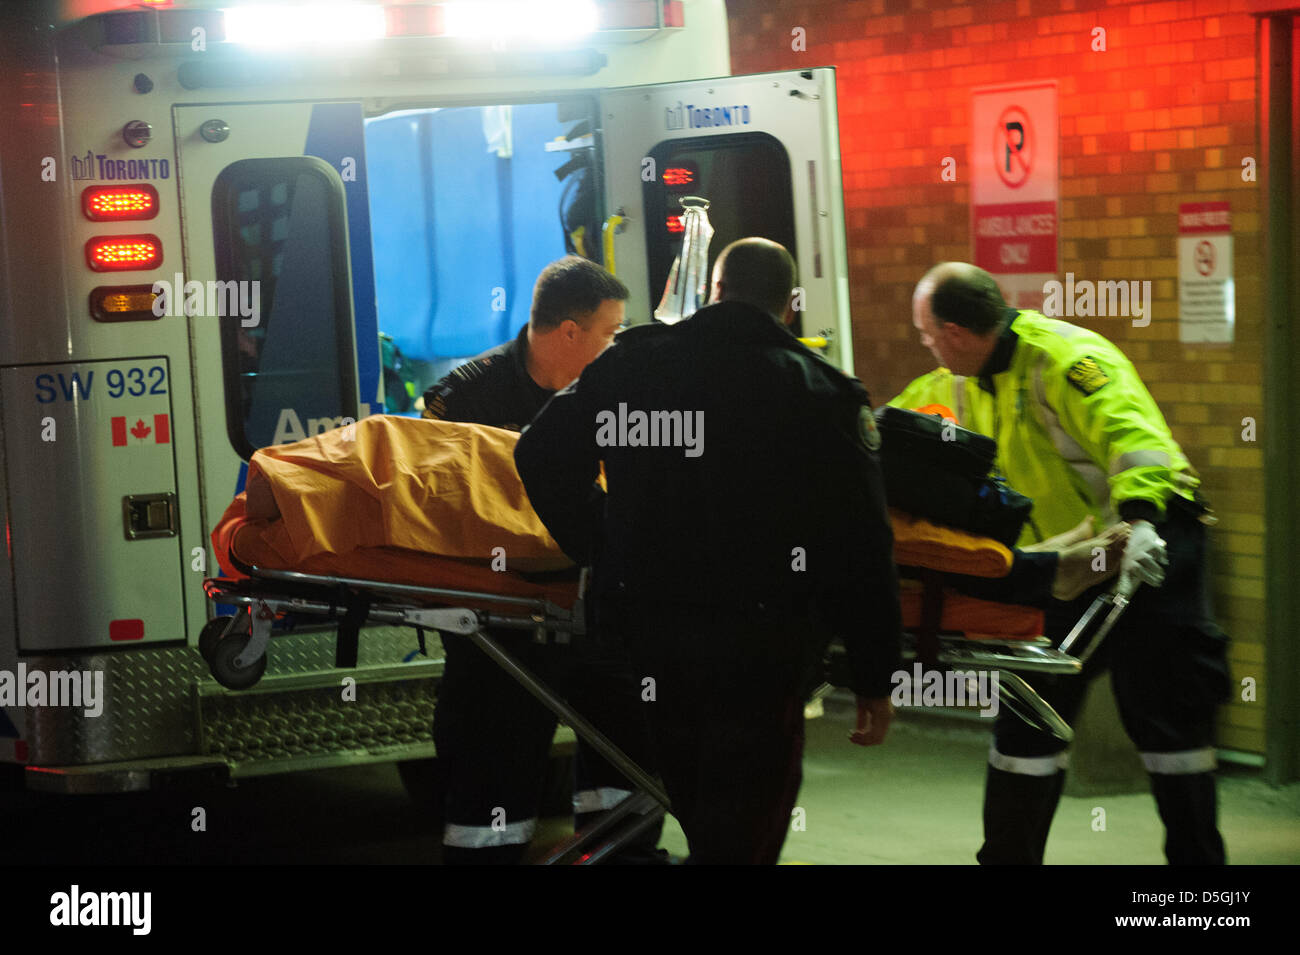 A man arrives at hospital after suffering injuries at Yorkdale Mall shooting. A man has been rushed to Sunnybrook Hospital, and another declared dead on the scene, after a shooting at Yorkdale Shopping centre in Toronto. Stock Photo